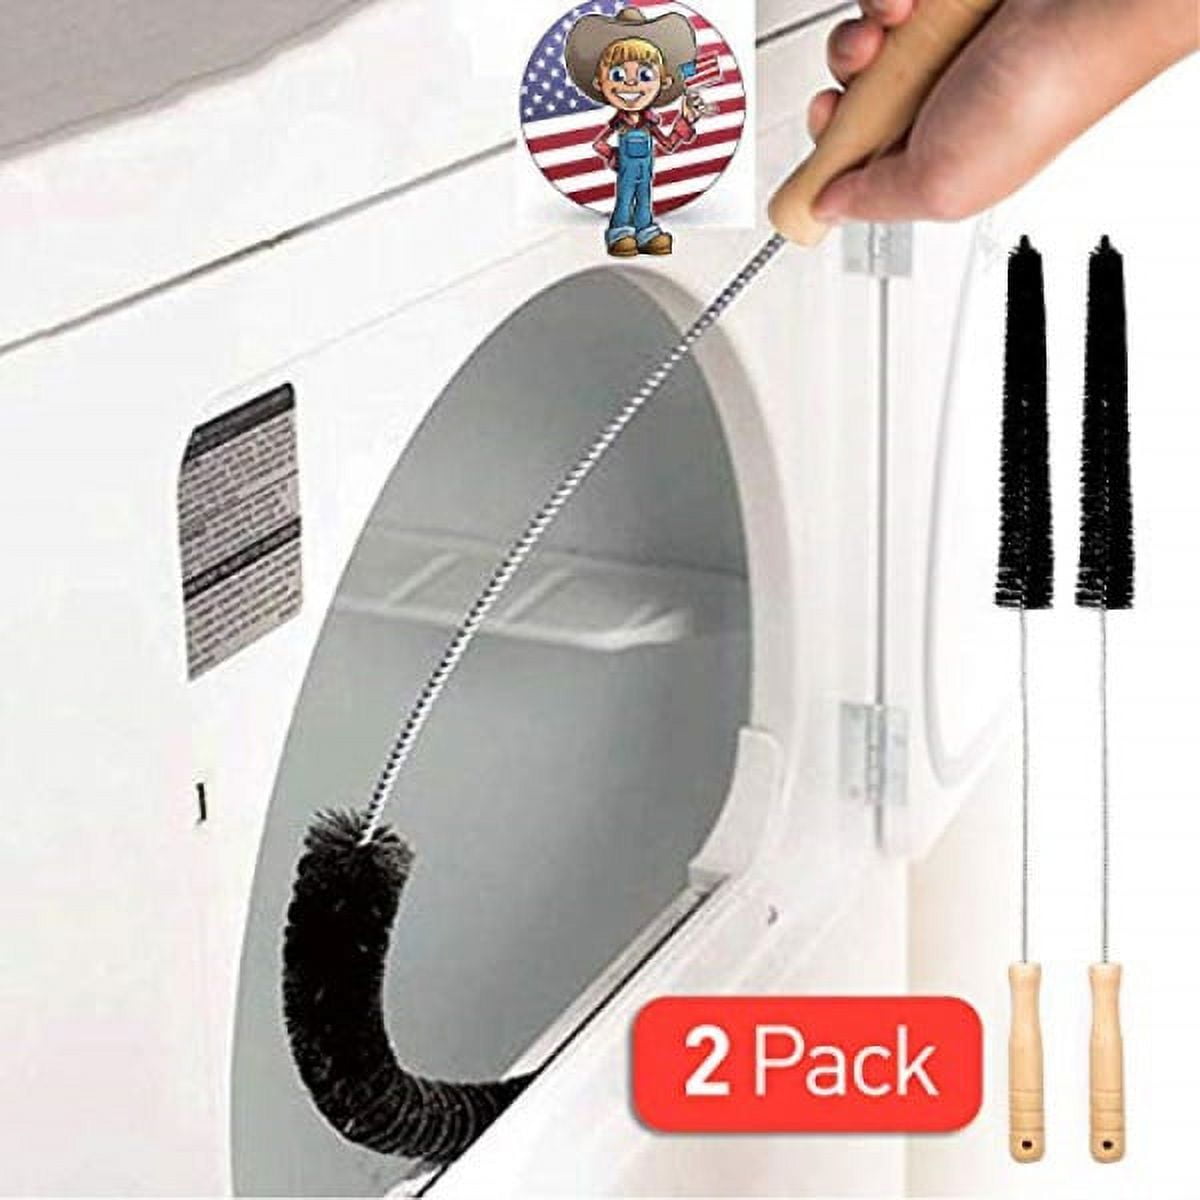 Holikme 2 Pack Dryer Vent Cleaner Kit Clothes Dryer Lint Brush Vent Trap  Cleaner Home Essentials Long Flexible Refrigerator Coil Brush Vacuum Brush